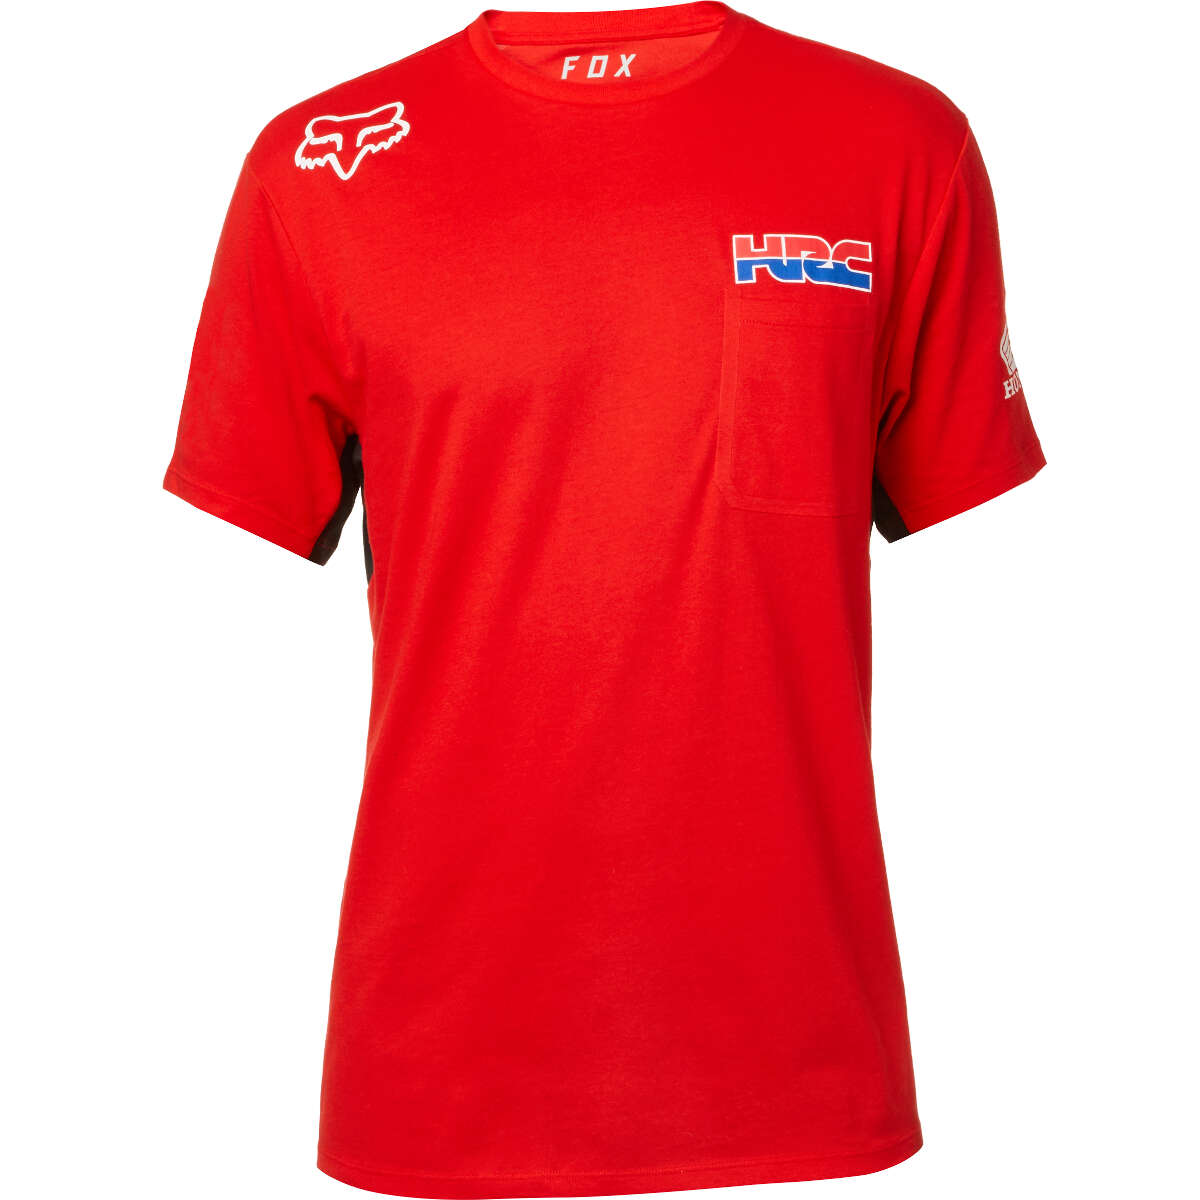 Fox T-Shirt Redplate HRC Airline Red